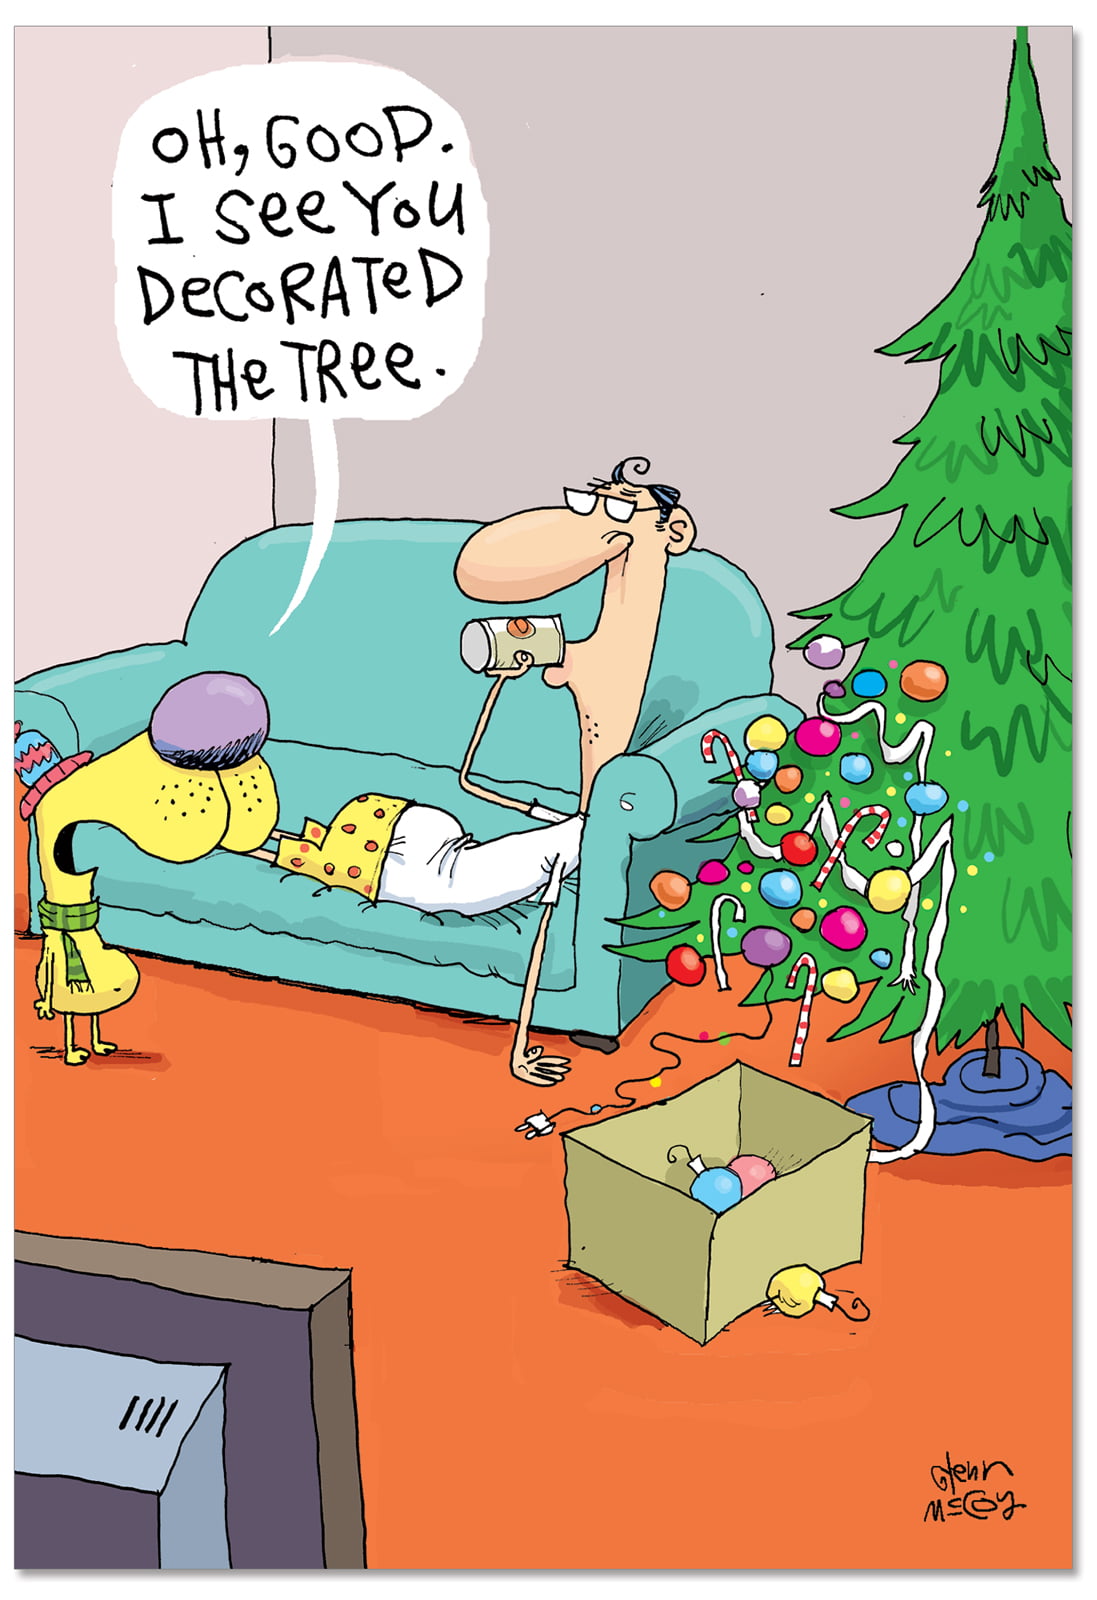 Lazy Decorating - 12 Boxed Funny Christmas Cards with Humorous Cartoon ...